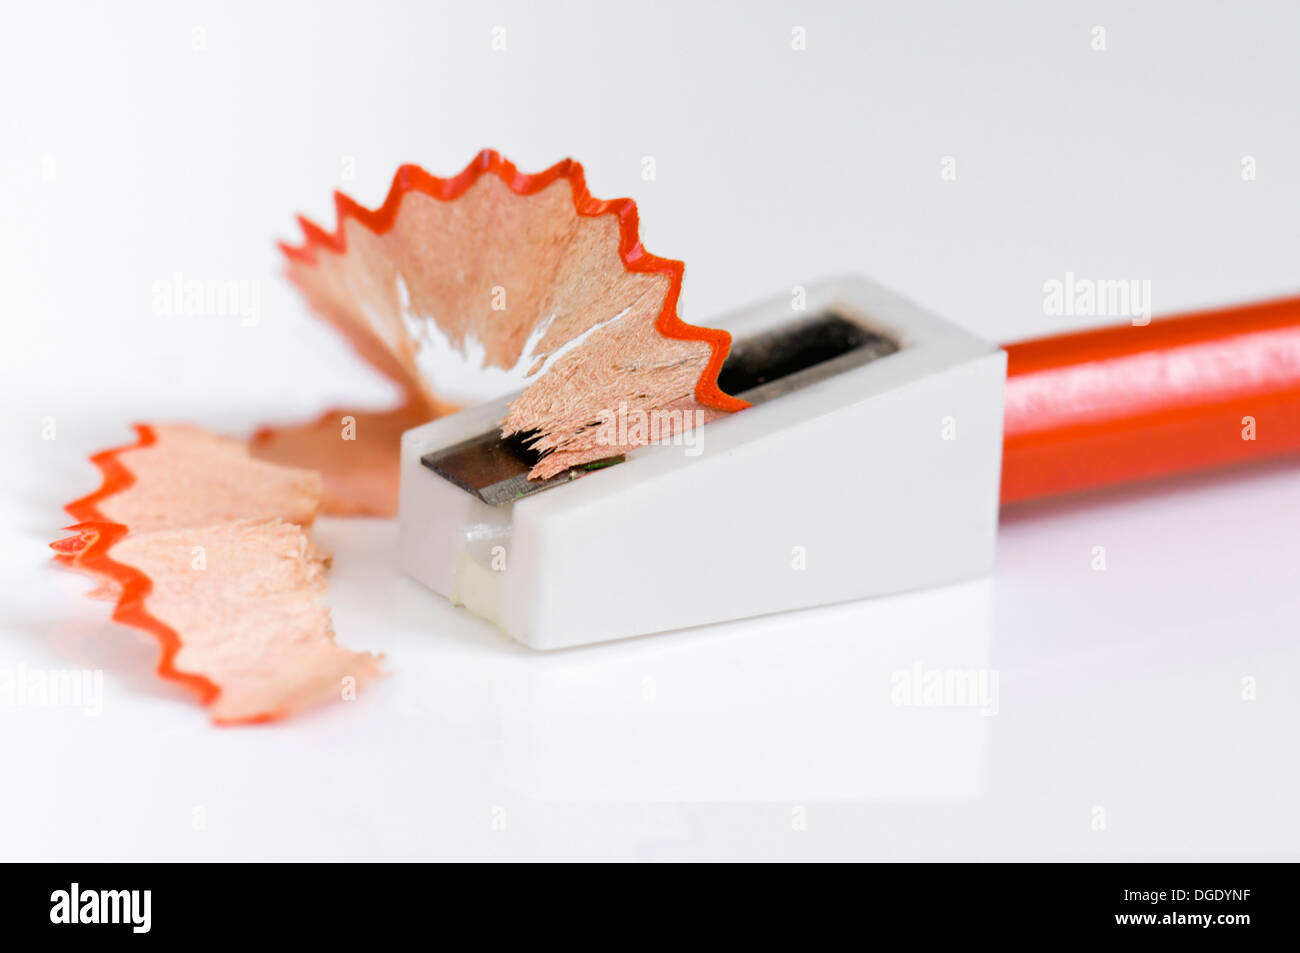 Colouring pencils with pencil shavings on old white background Stock Photo